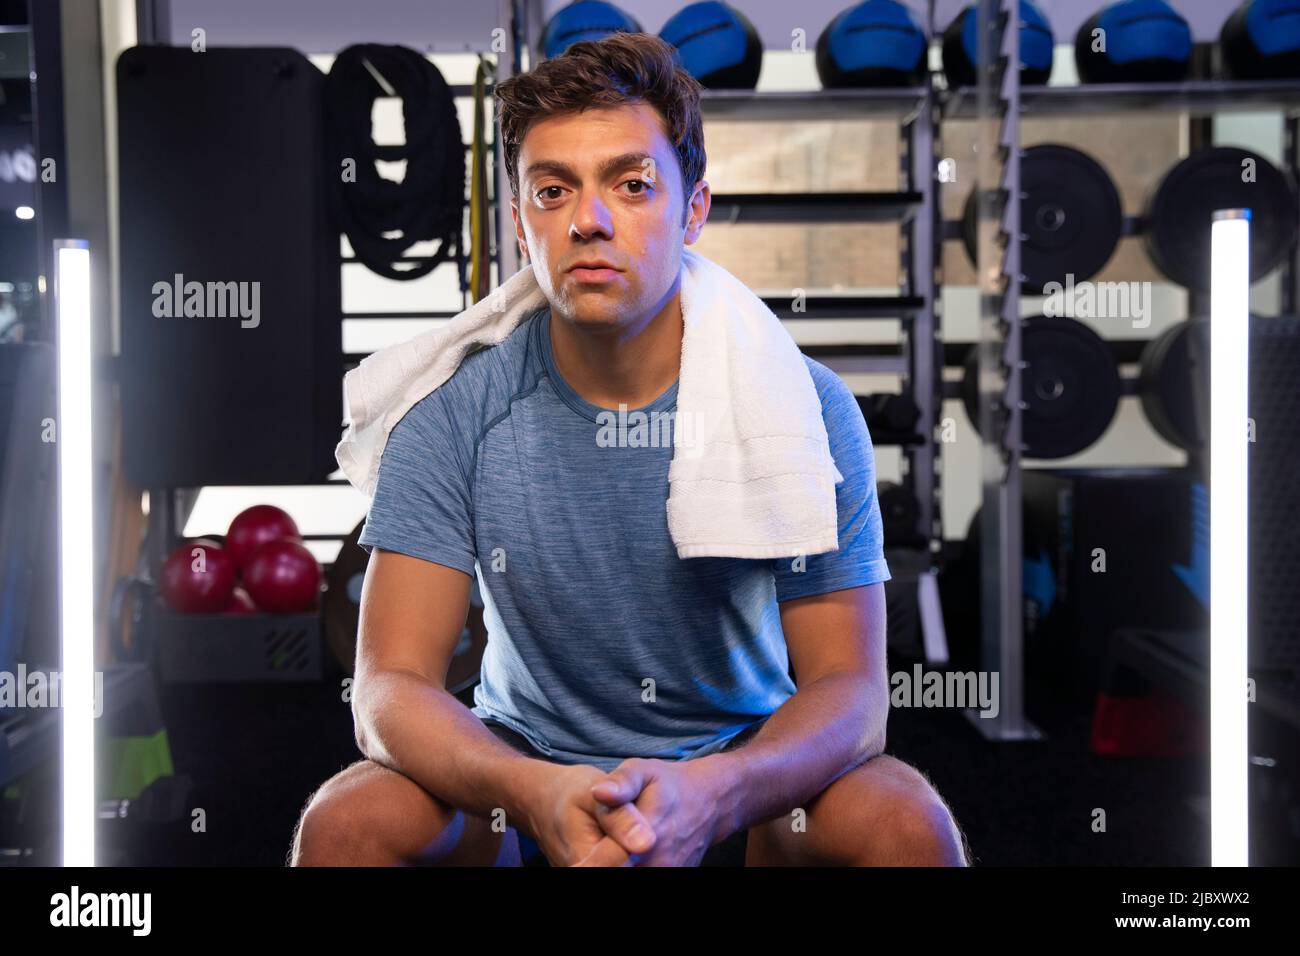 Portrait of man taking a break during workout looking into cameras Stock Photo